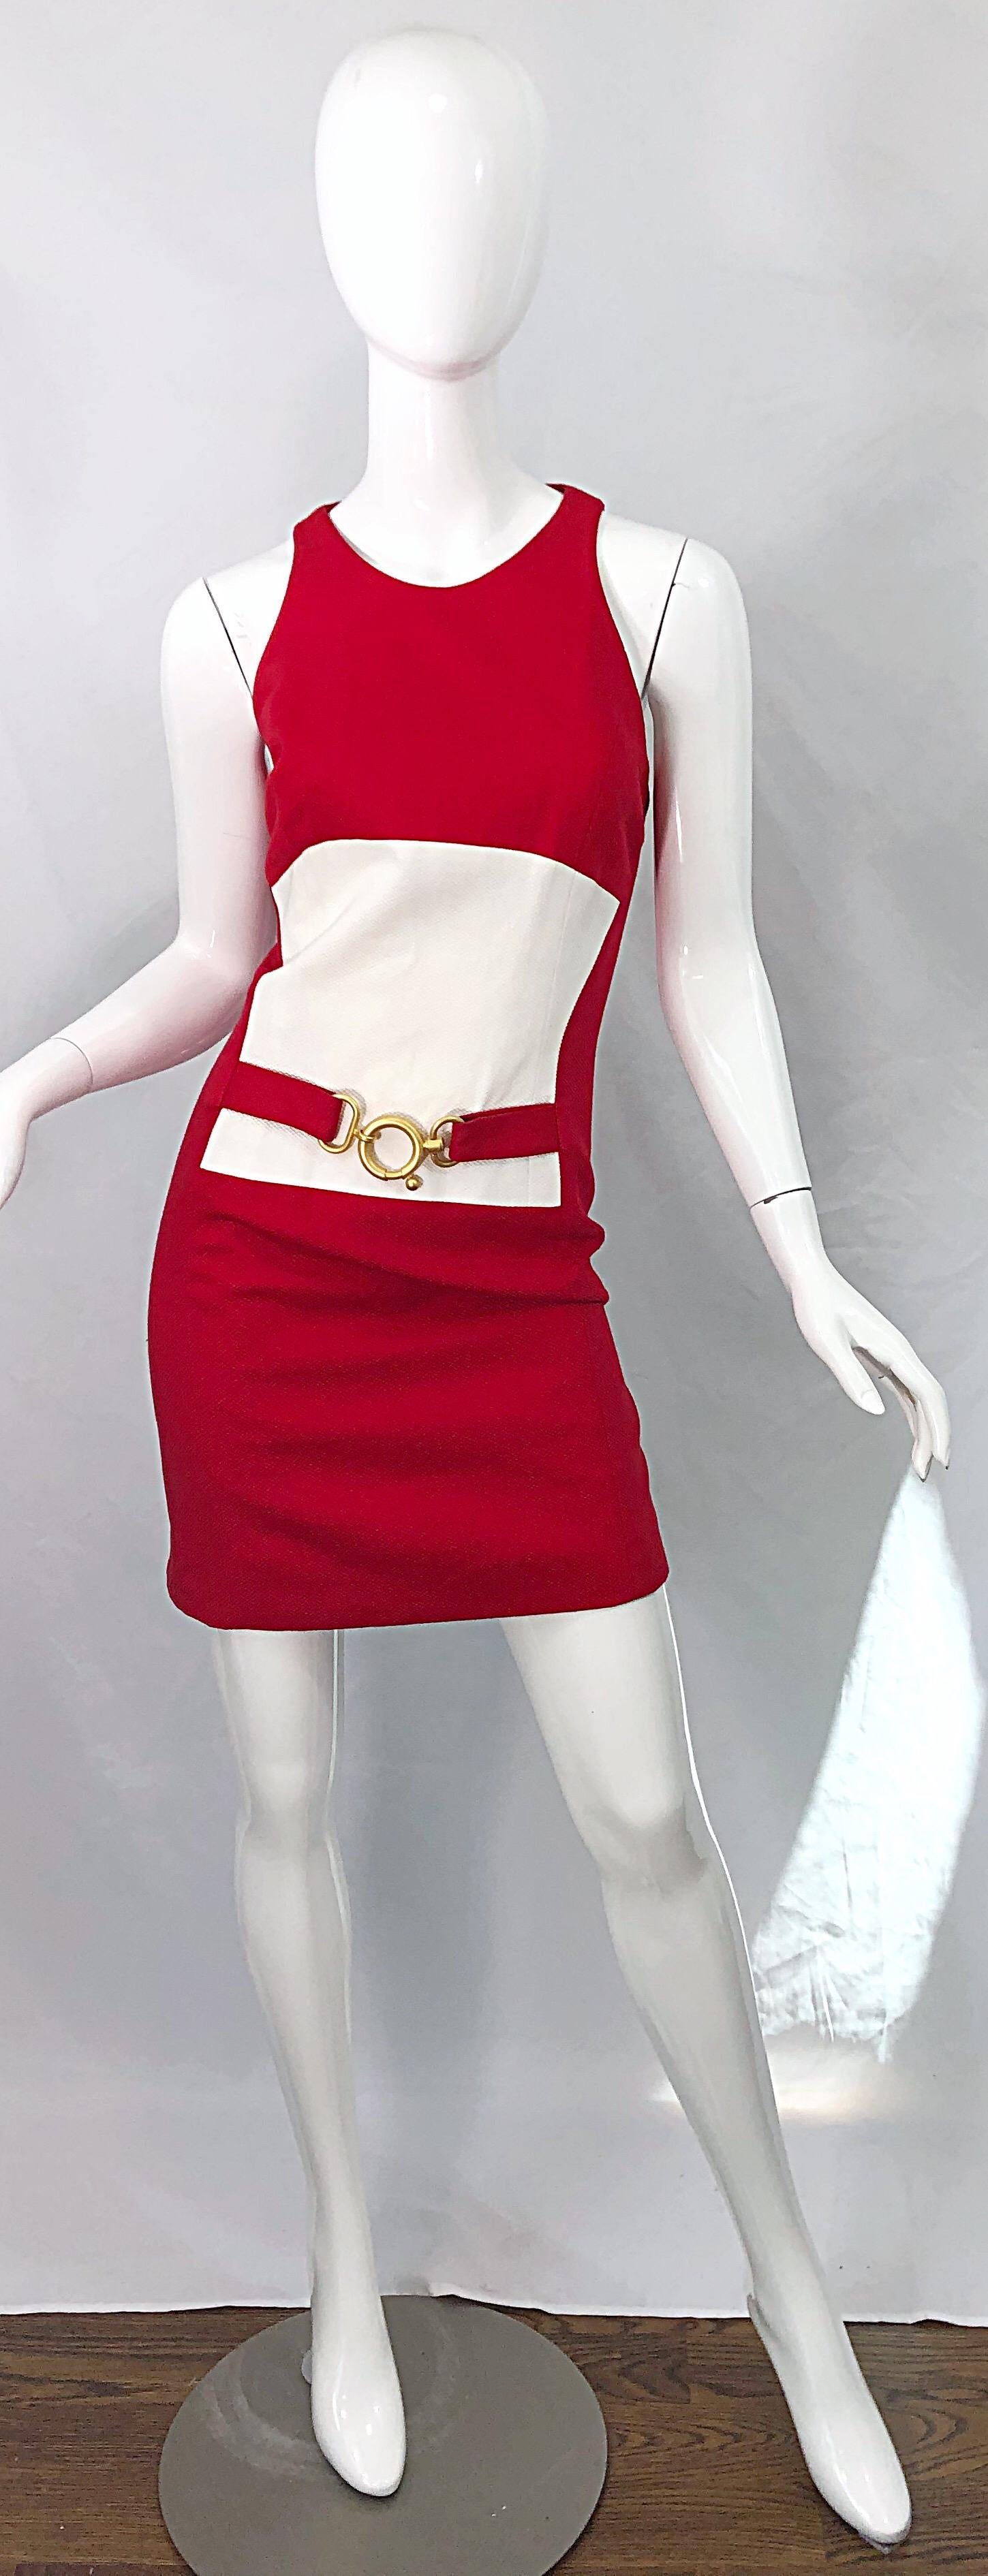 Stylish and flattering early 90s LINDA SEGAL lipstick red and white colorblocked pique cotton sleeveless nautical sheath dress ! Linda Segal pieces were often worn by Fran Fine, played by Fran Drescher in the 1990s. 

Features a lipstick red body